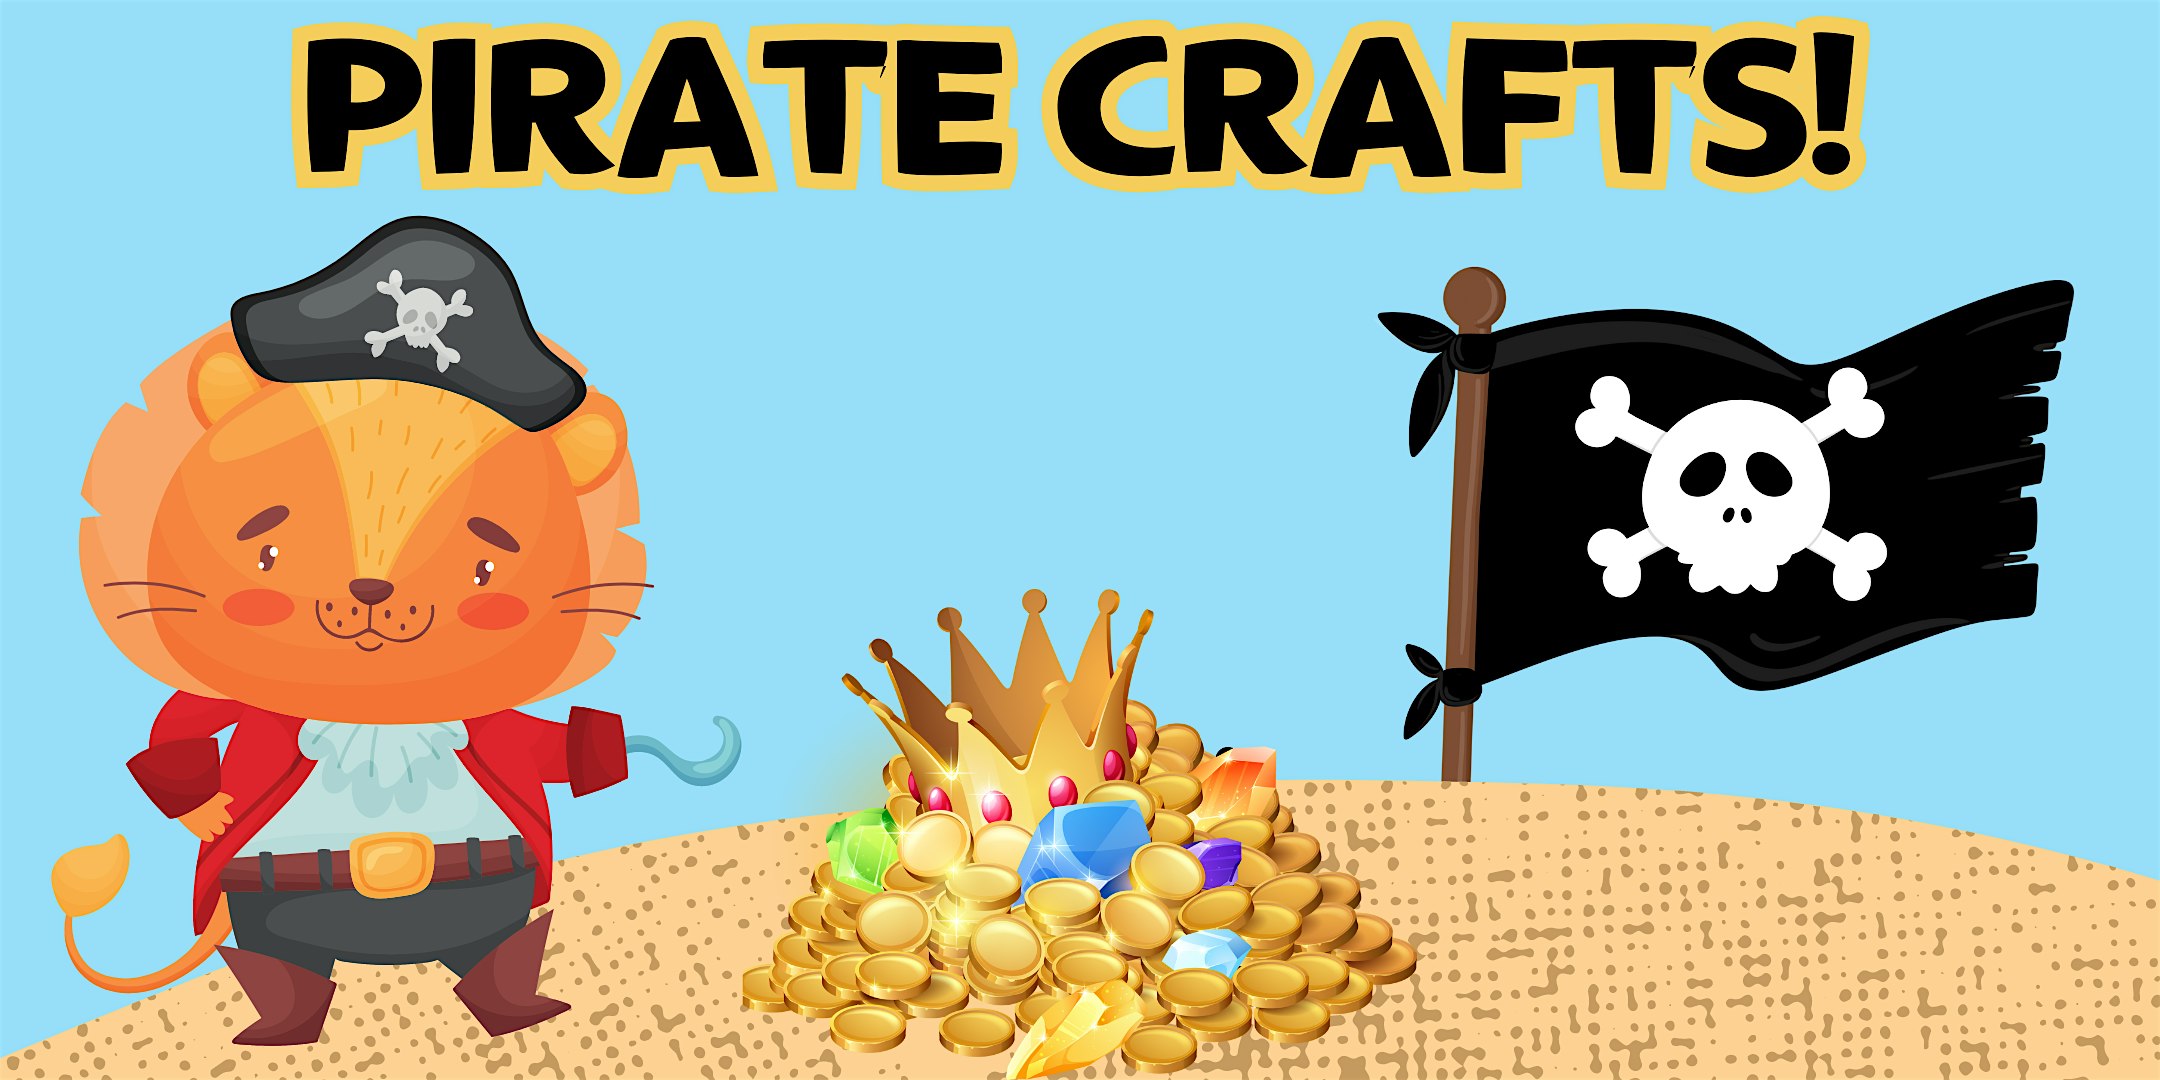 Pirate Crafts! (Kids of All Ages)